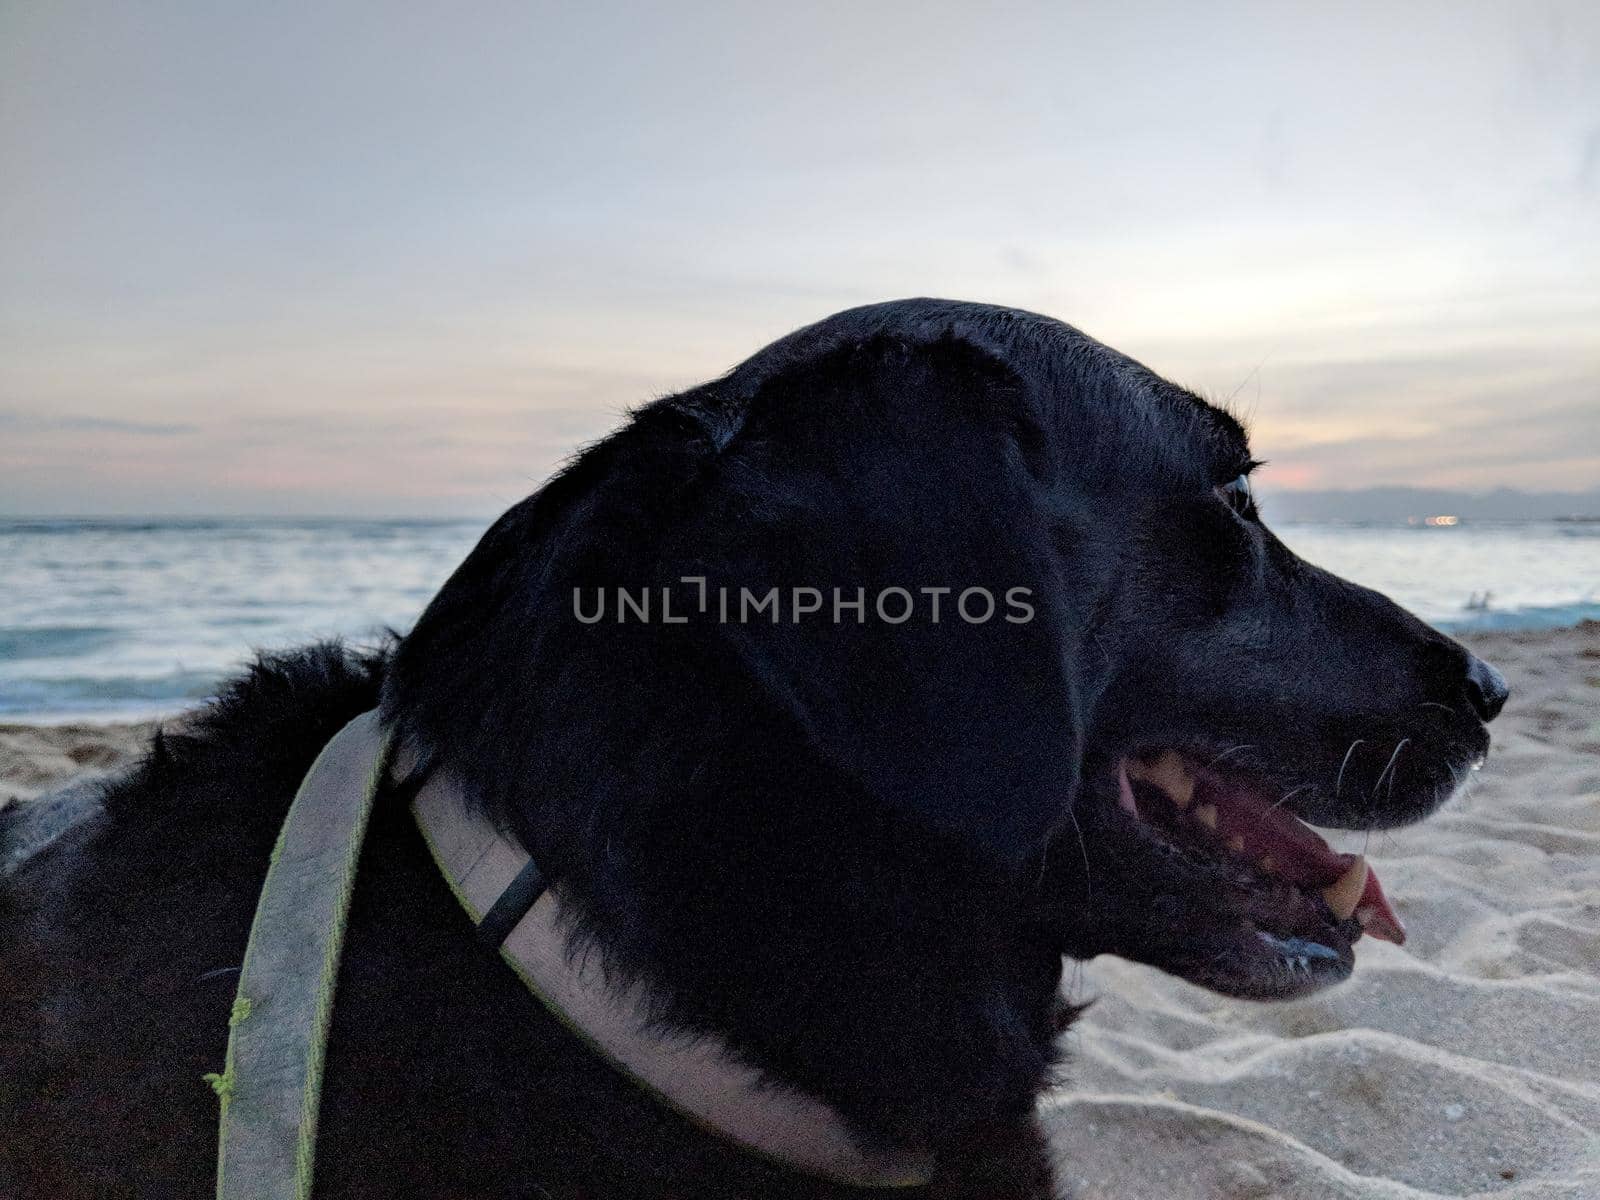 Black retriever Dog wearing a leash and tongue hanging out at dusk with view of Pacific ocean  by EricGBVD